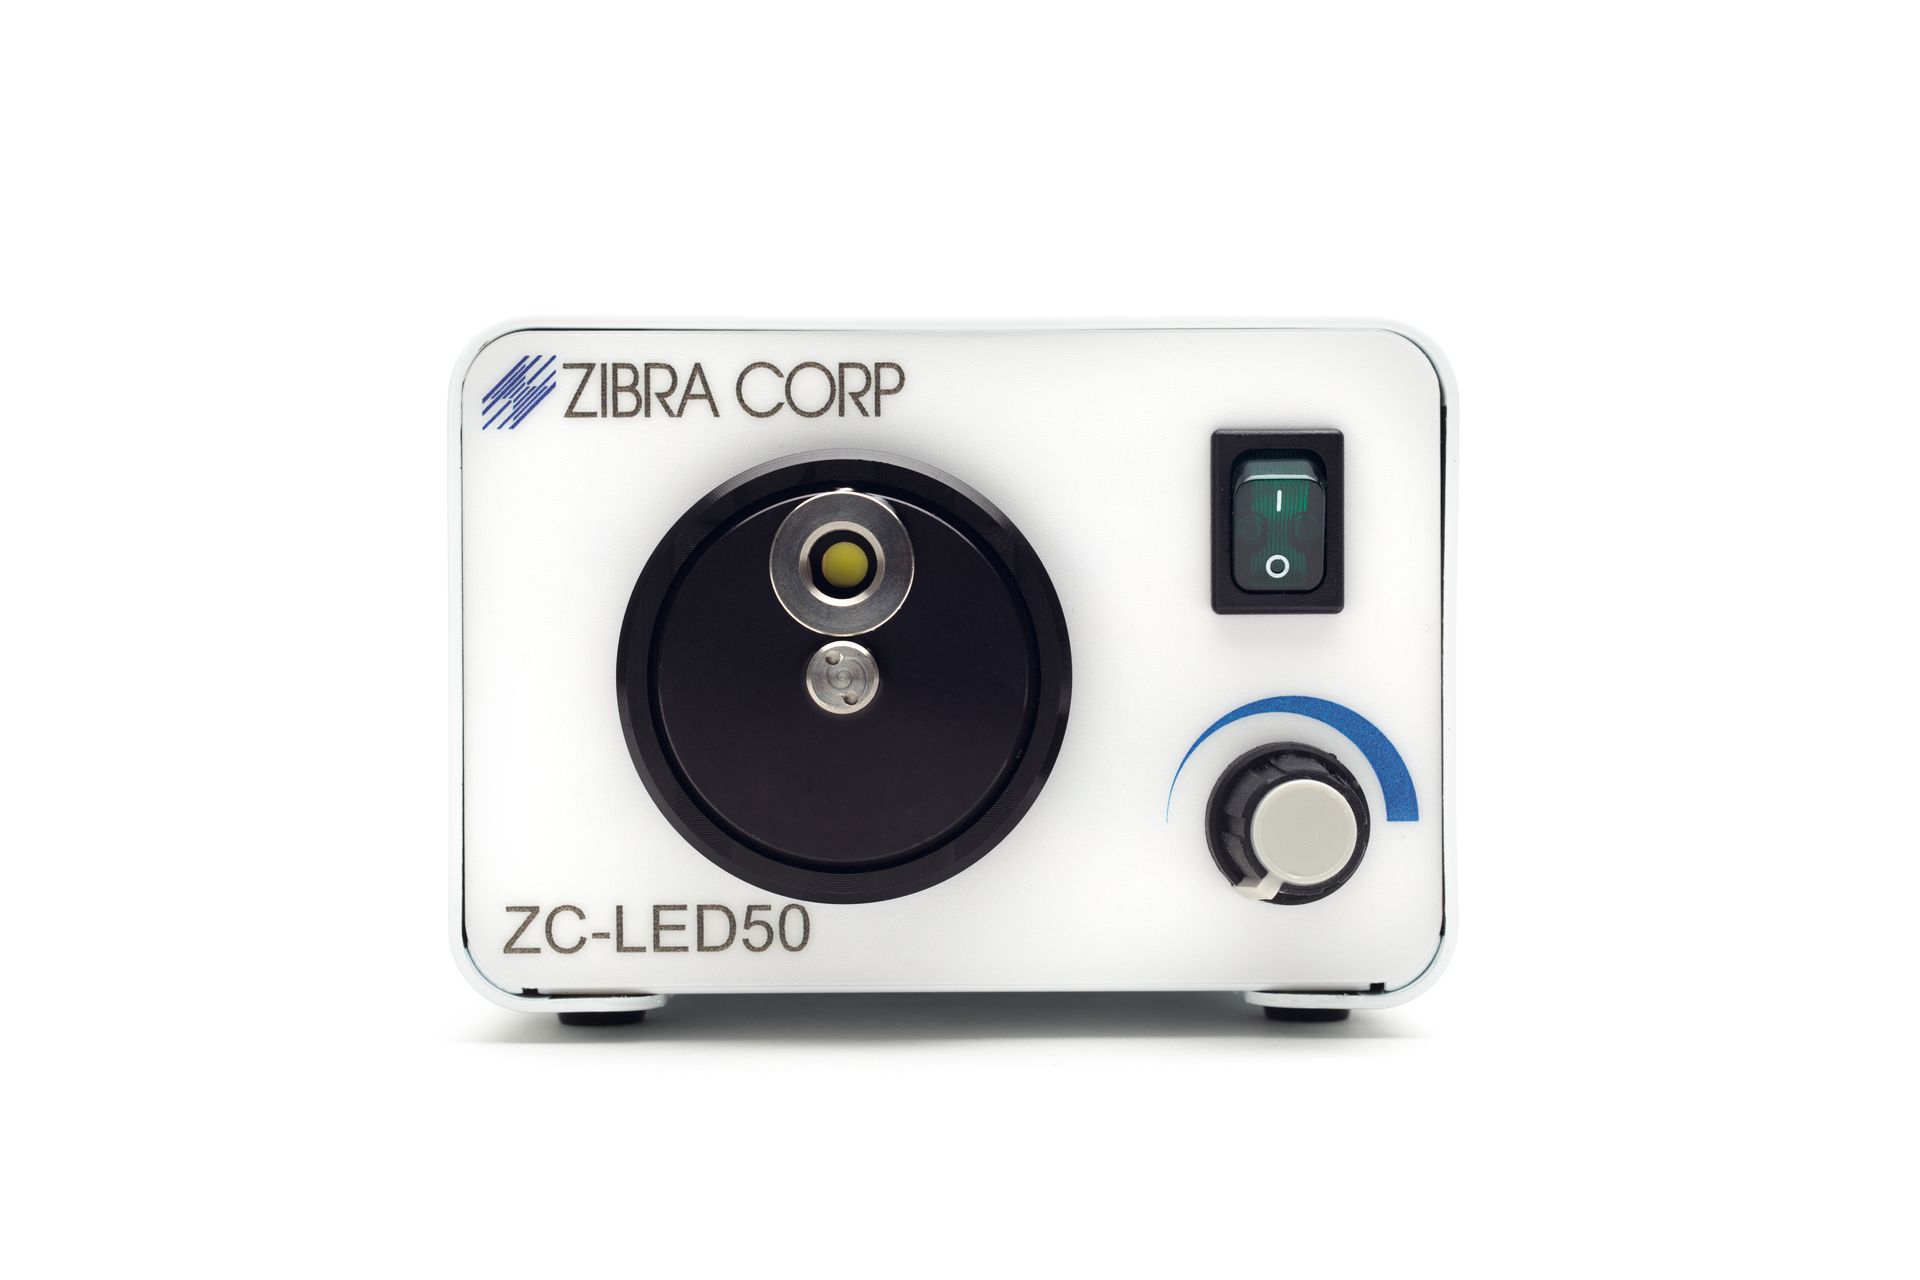 A zebra corp zc-lfd50 device is sitting on a white surface